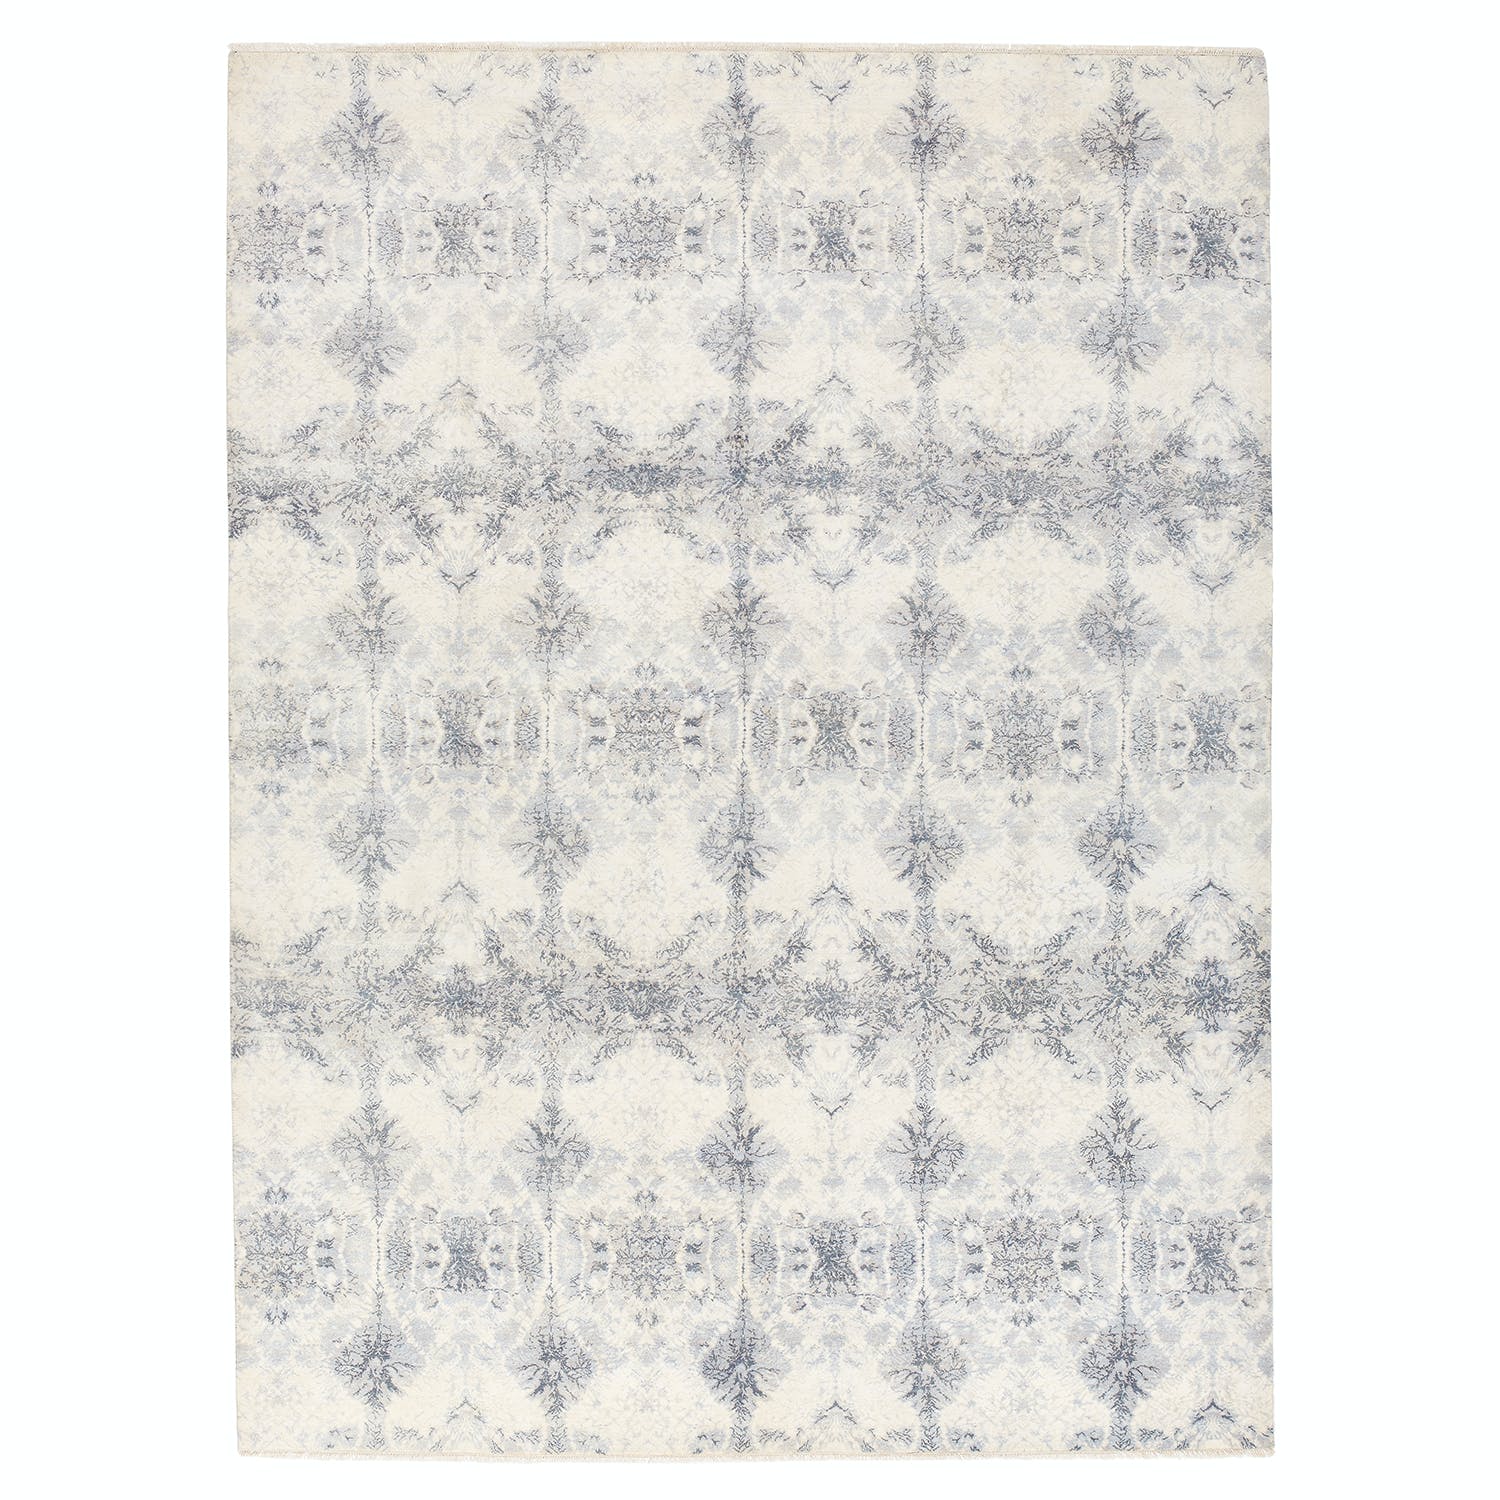 Vintage-inspired rectangular rug with distressed pattern in muted colors.